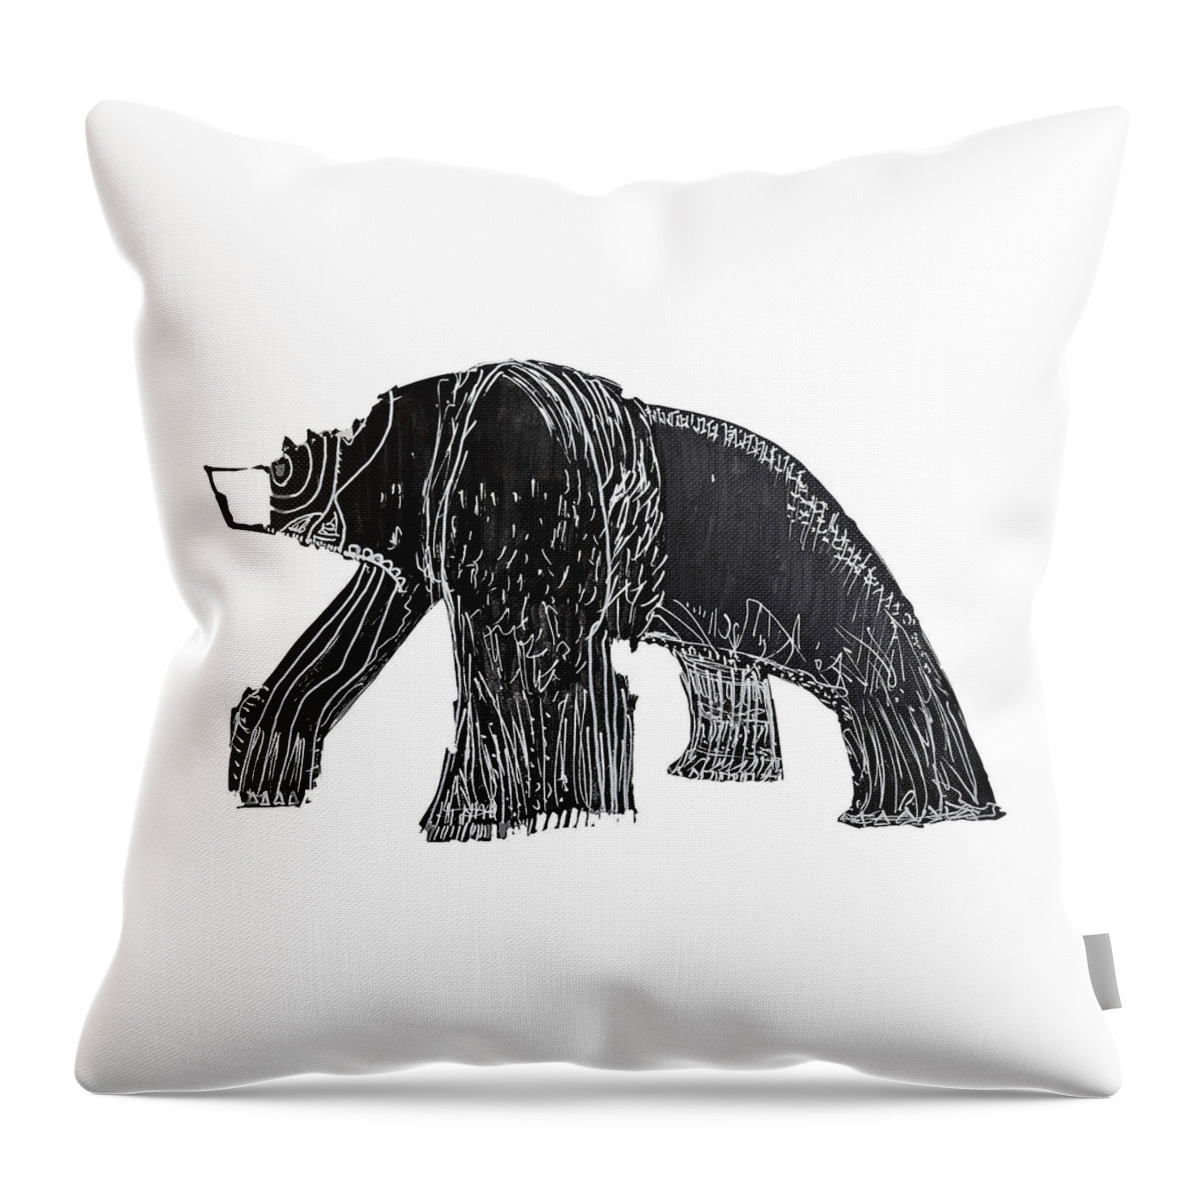  Throw Pillow featuring the drawing Great Bear by Pam O'Mara